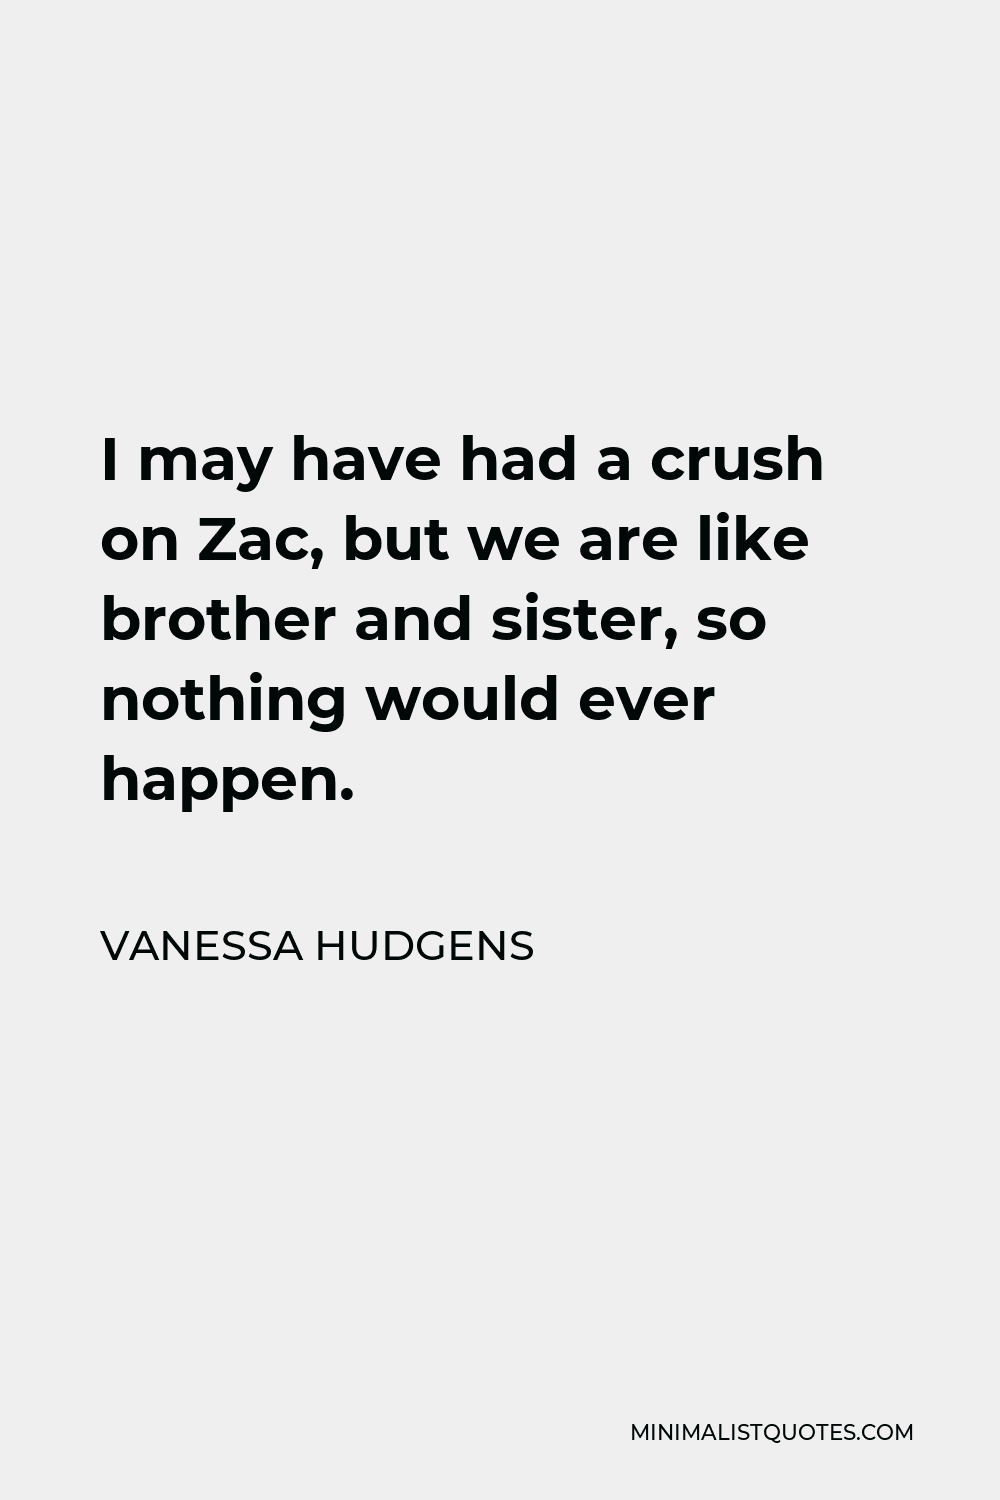 Vanessa Hudgens Quote - I may have had a crush on Zac, but we are like brother and sister, so nothing would ever happen.